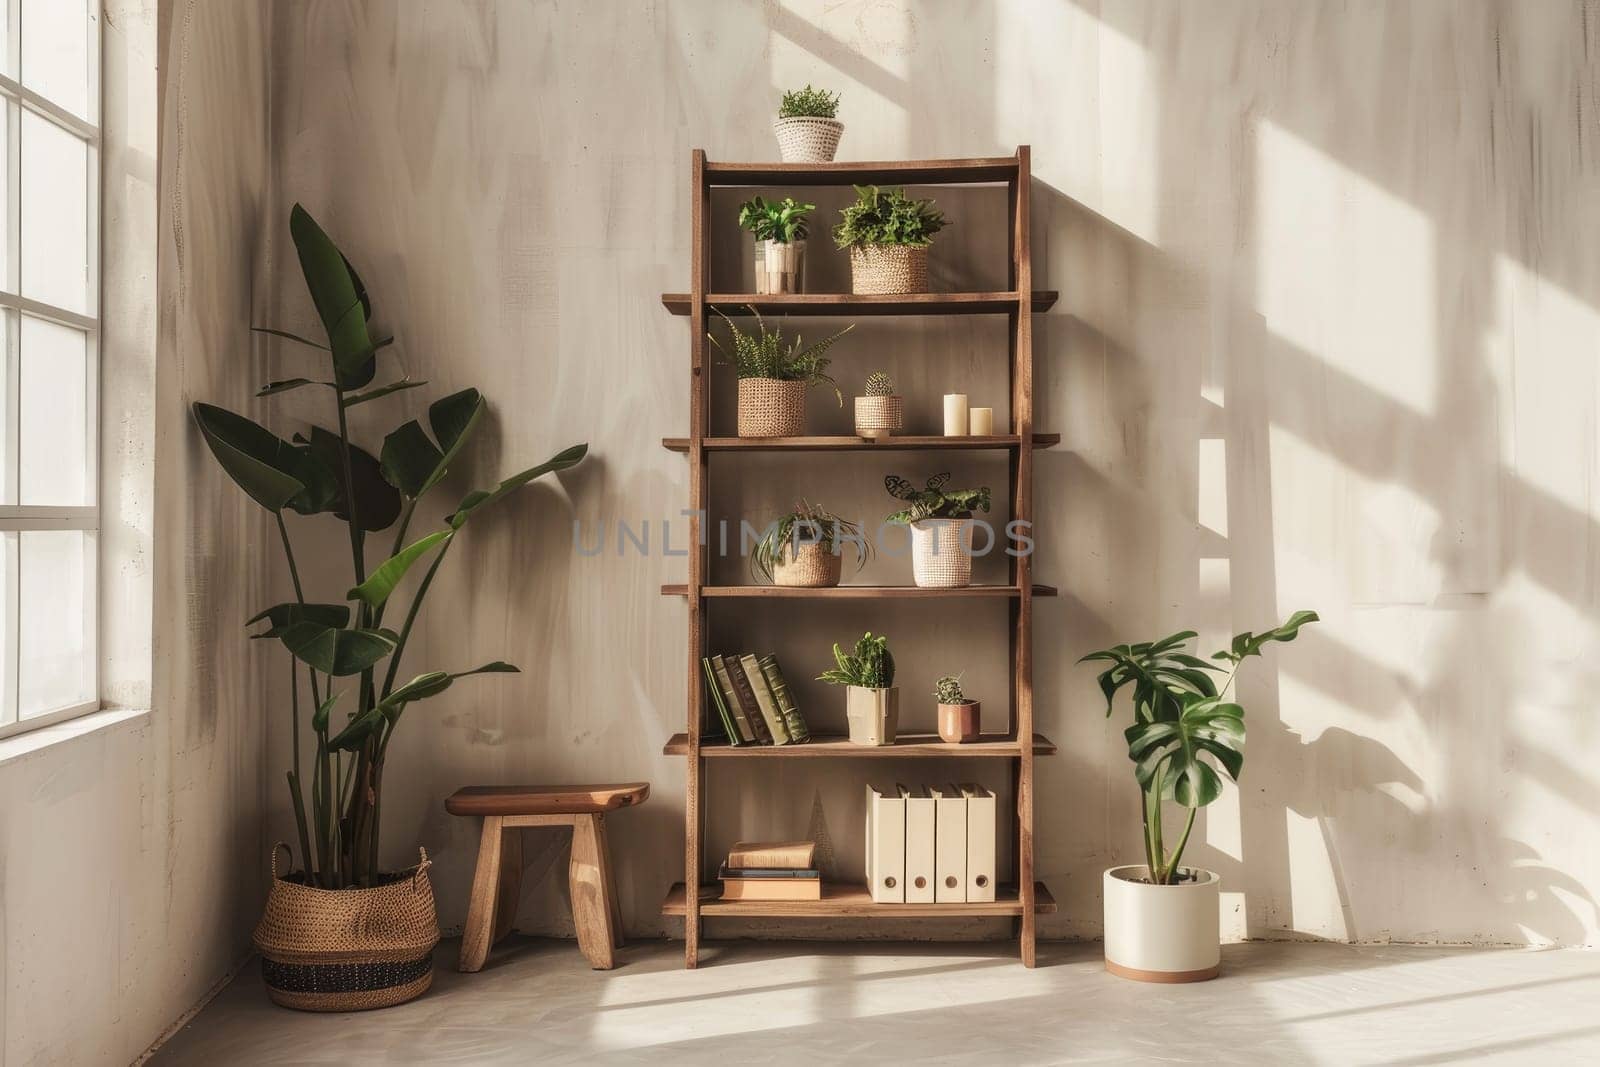 Minimalist workspace with a geometric bookshelf and potted plants. by Chawagen